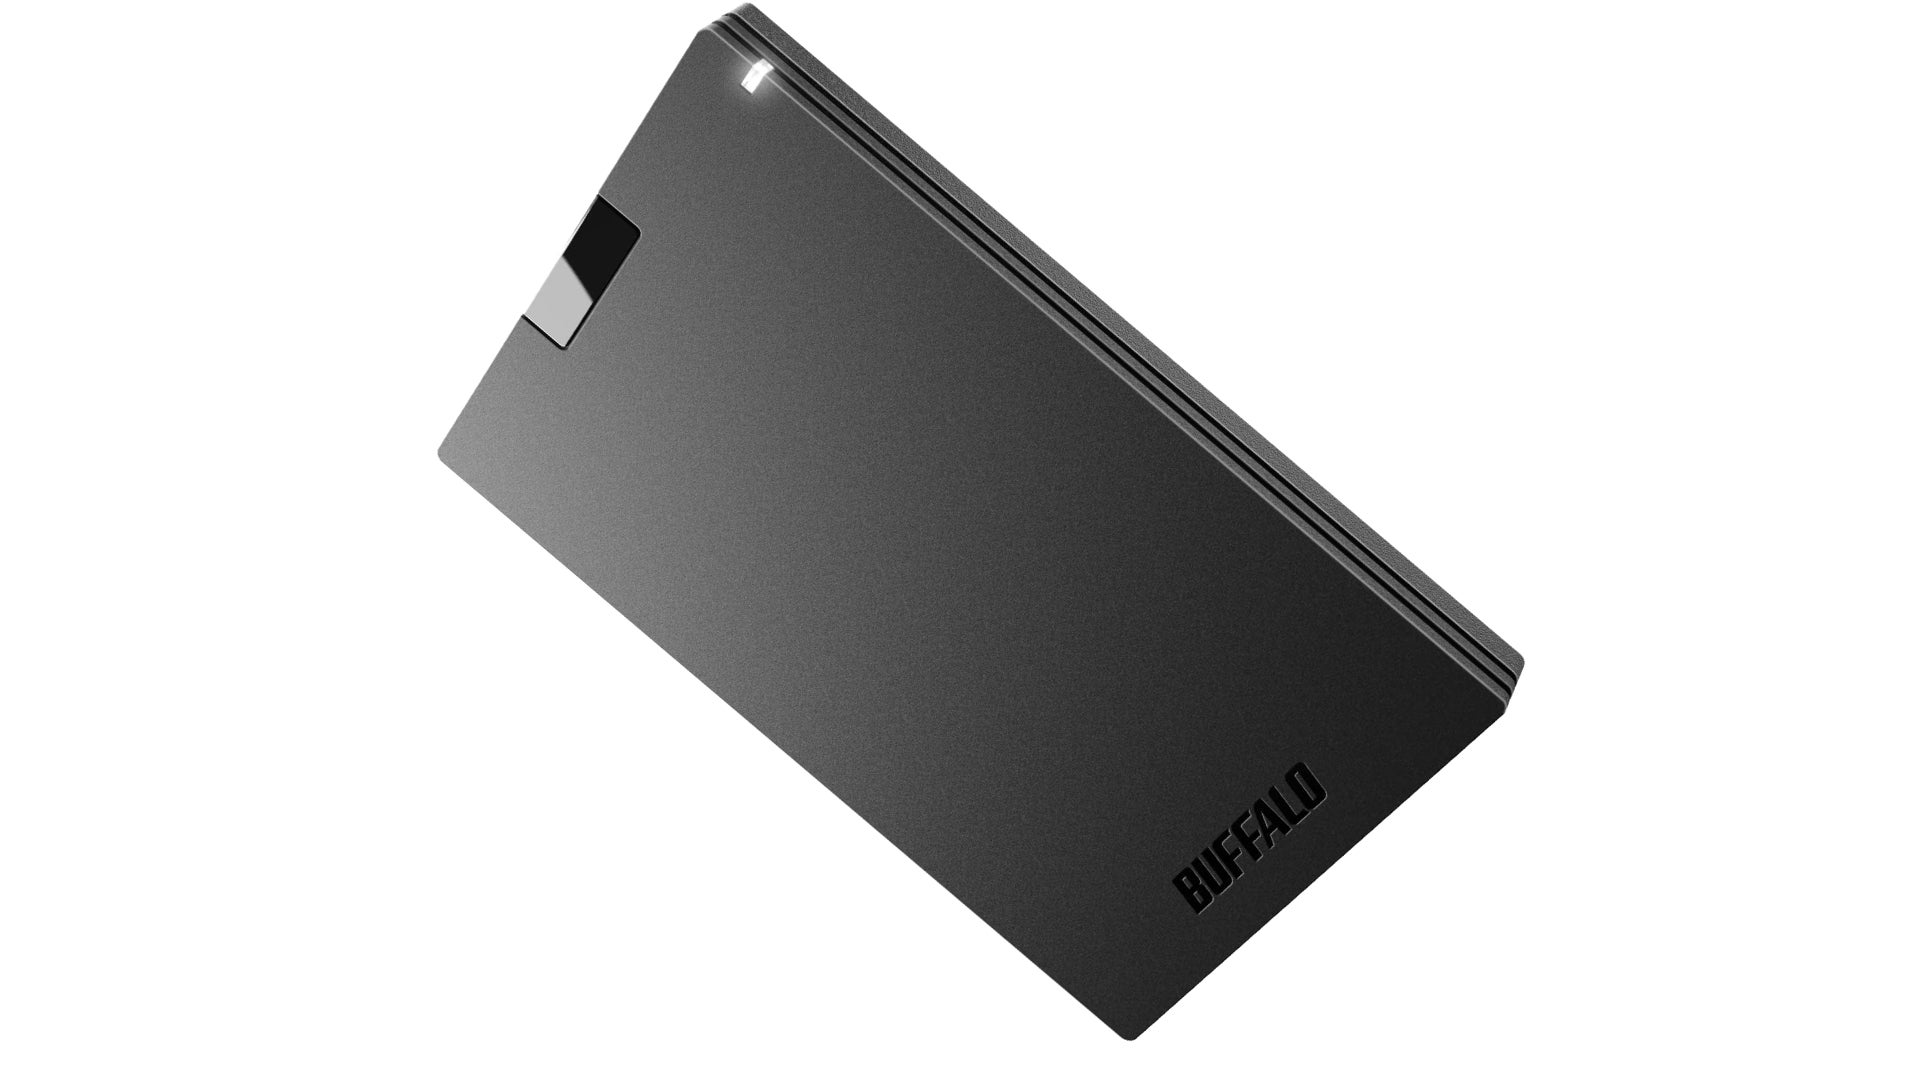 Image for Grab this Buffalo External SSD 1TB for nearly half price in this Amazon US Black Friday lightning deal.